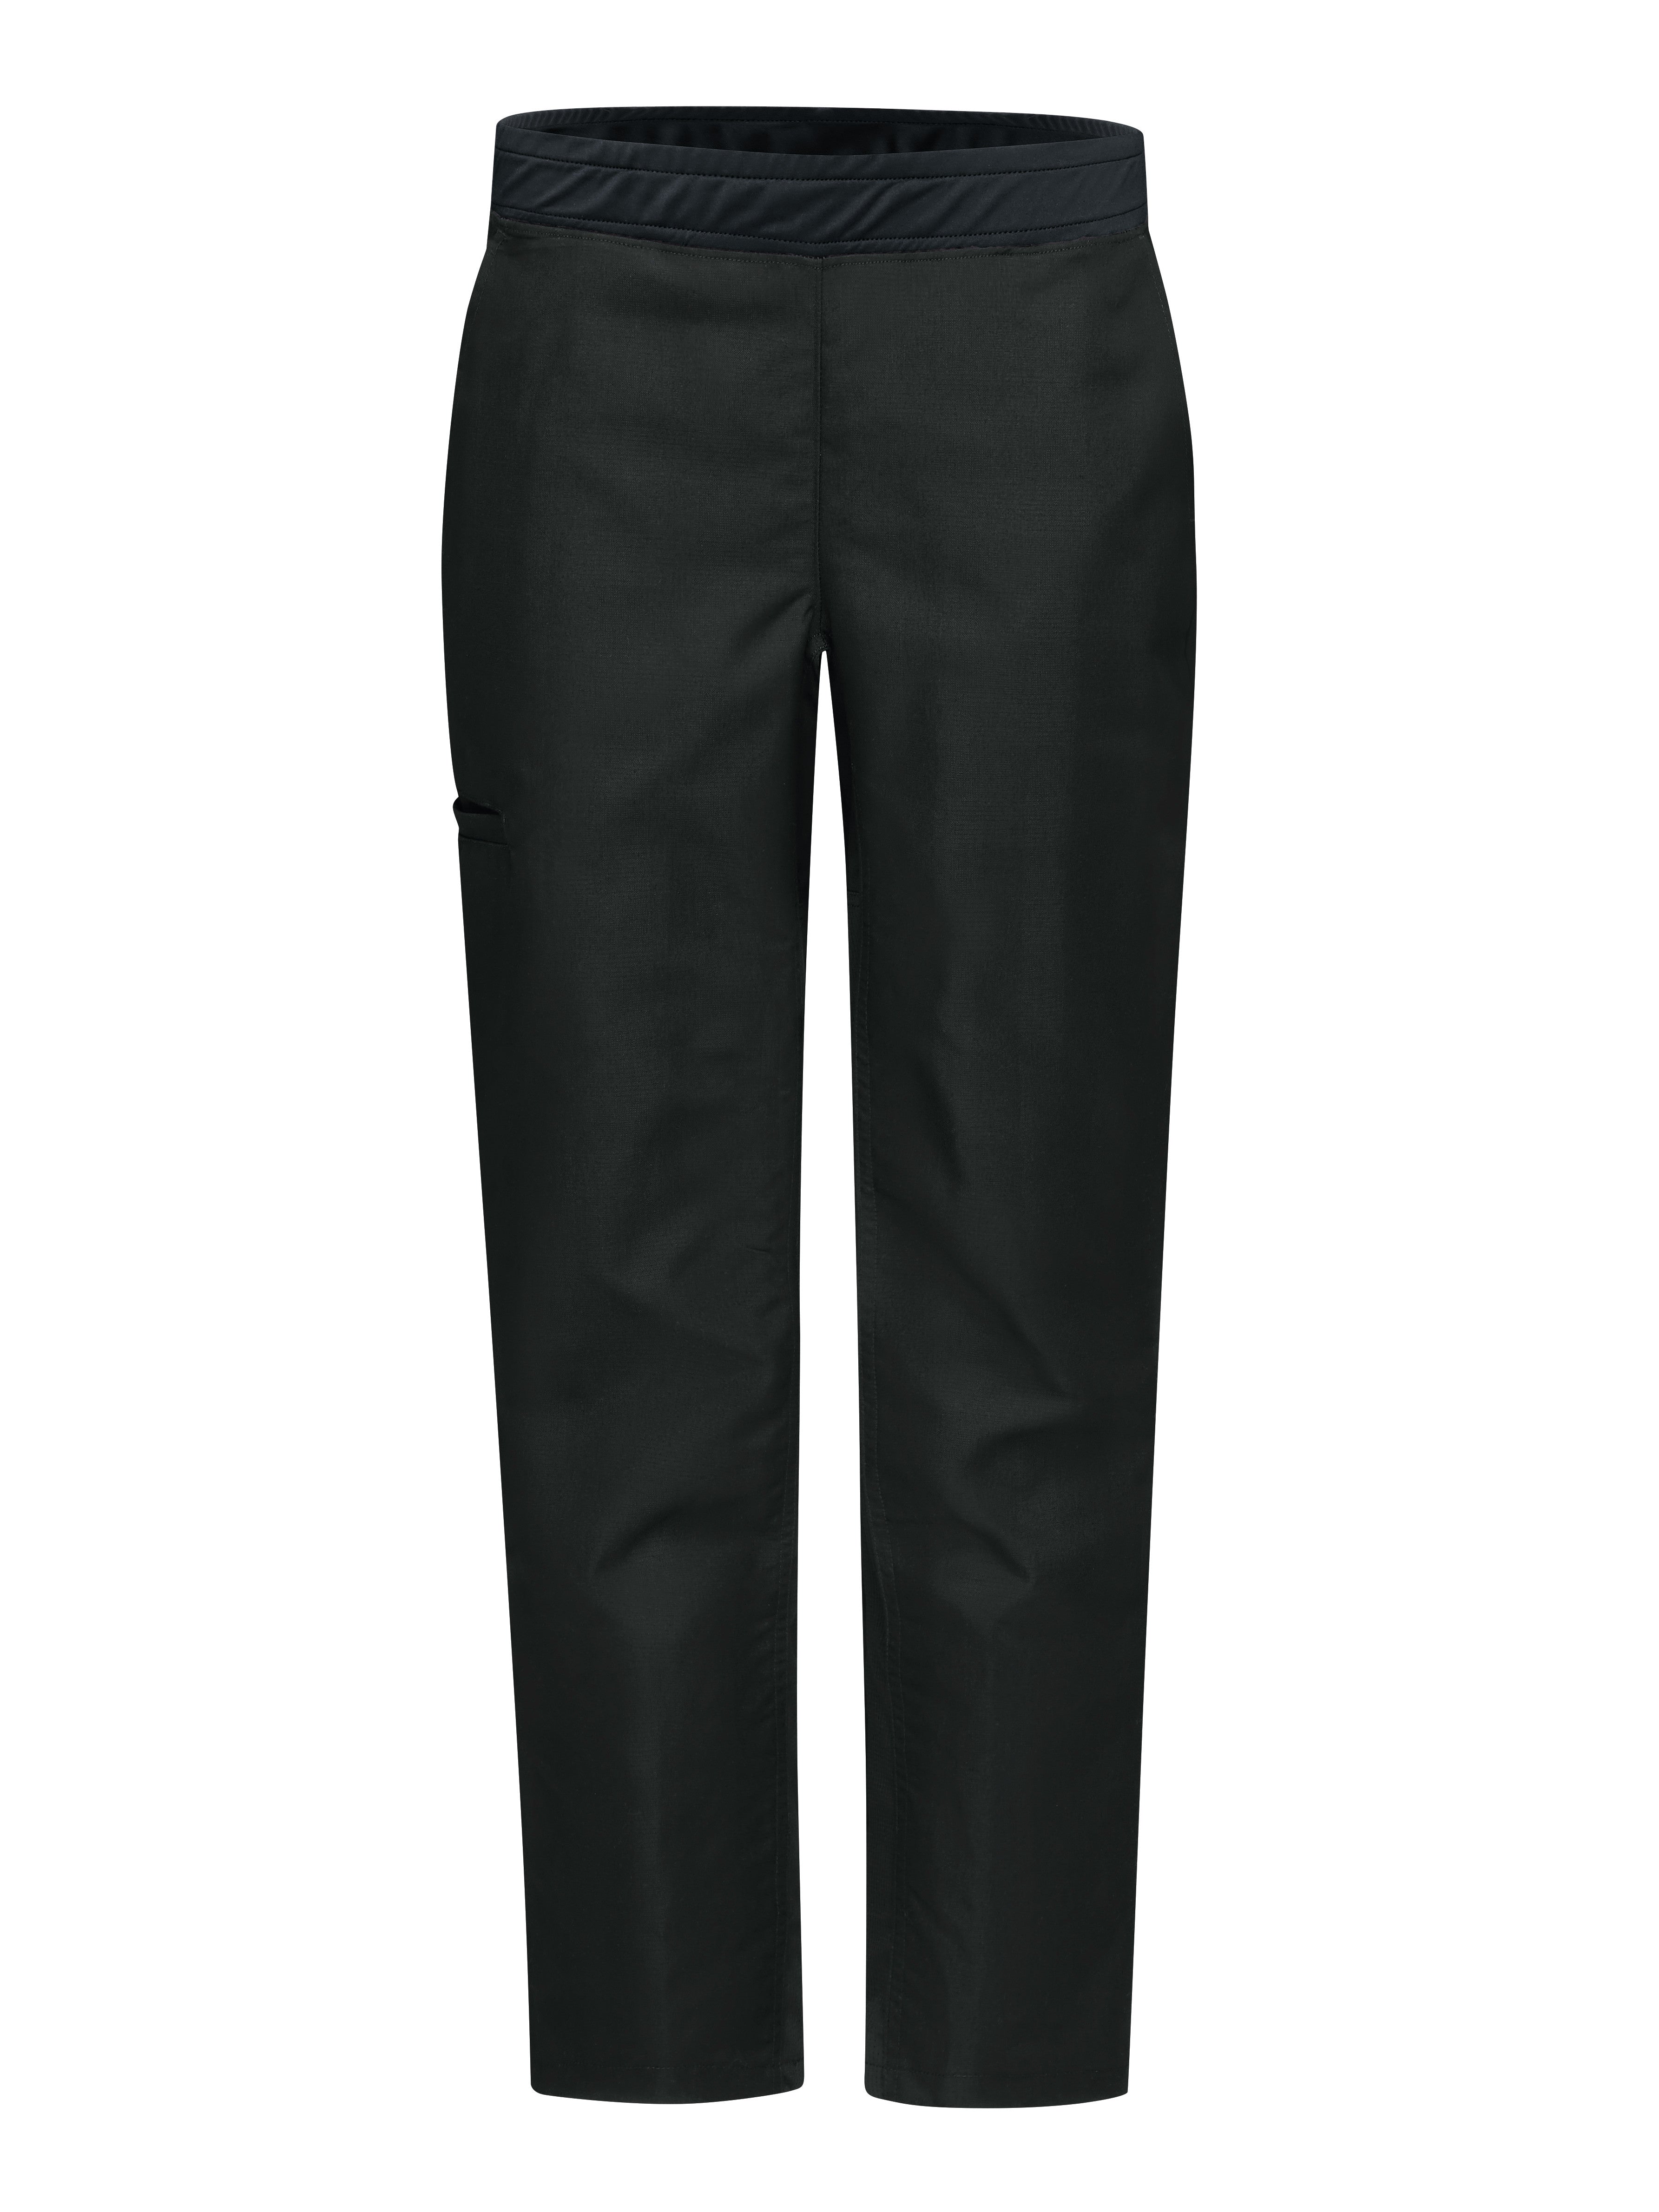 Red Kap Women's Straight Fit Airflow Chef Pant